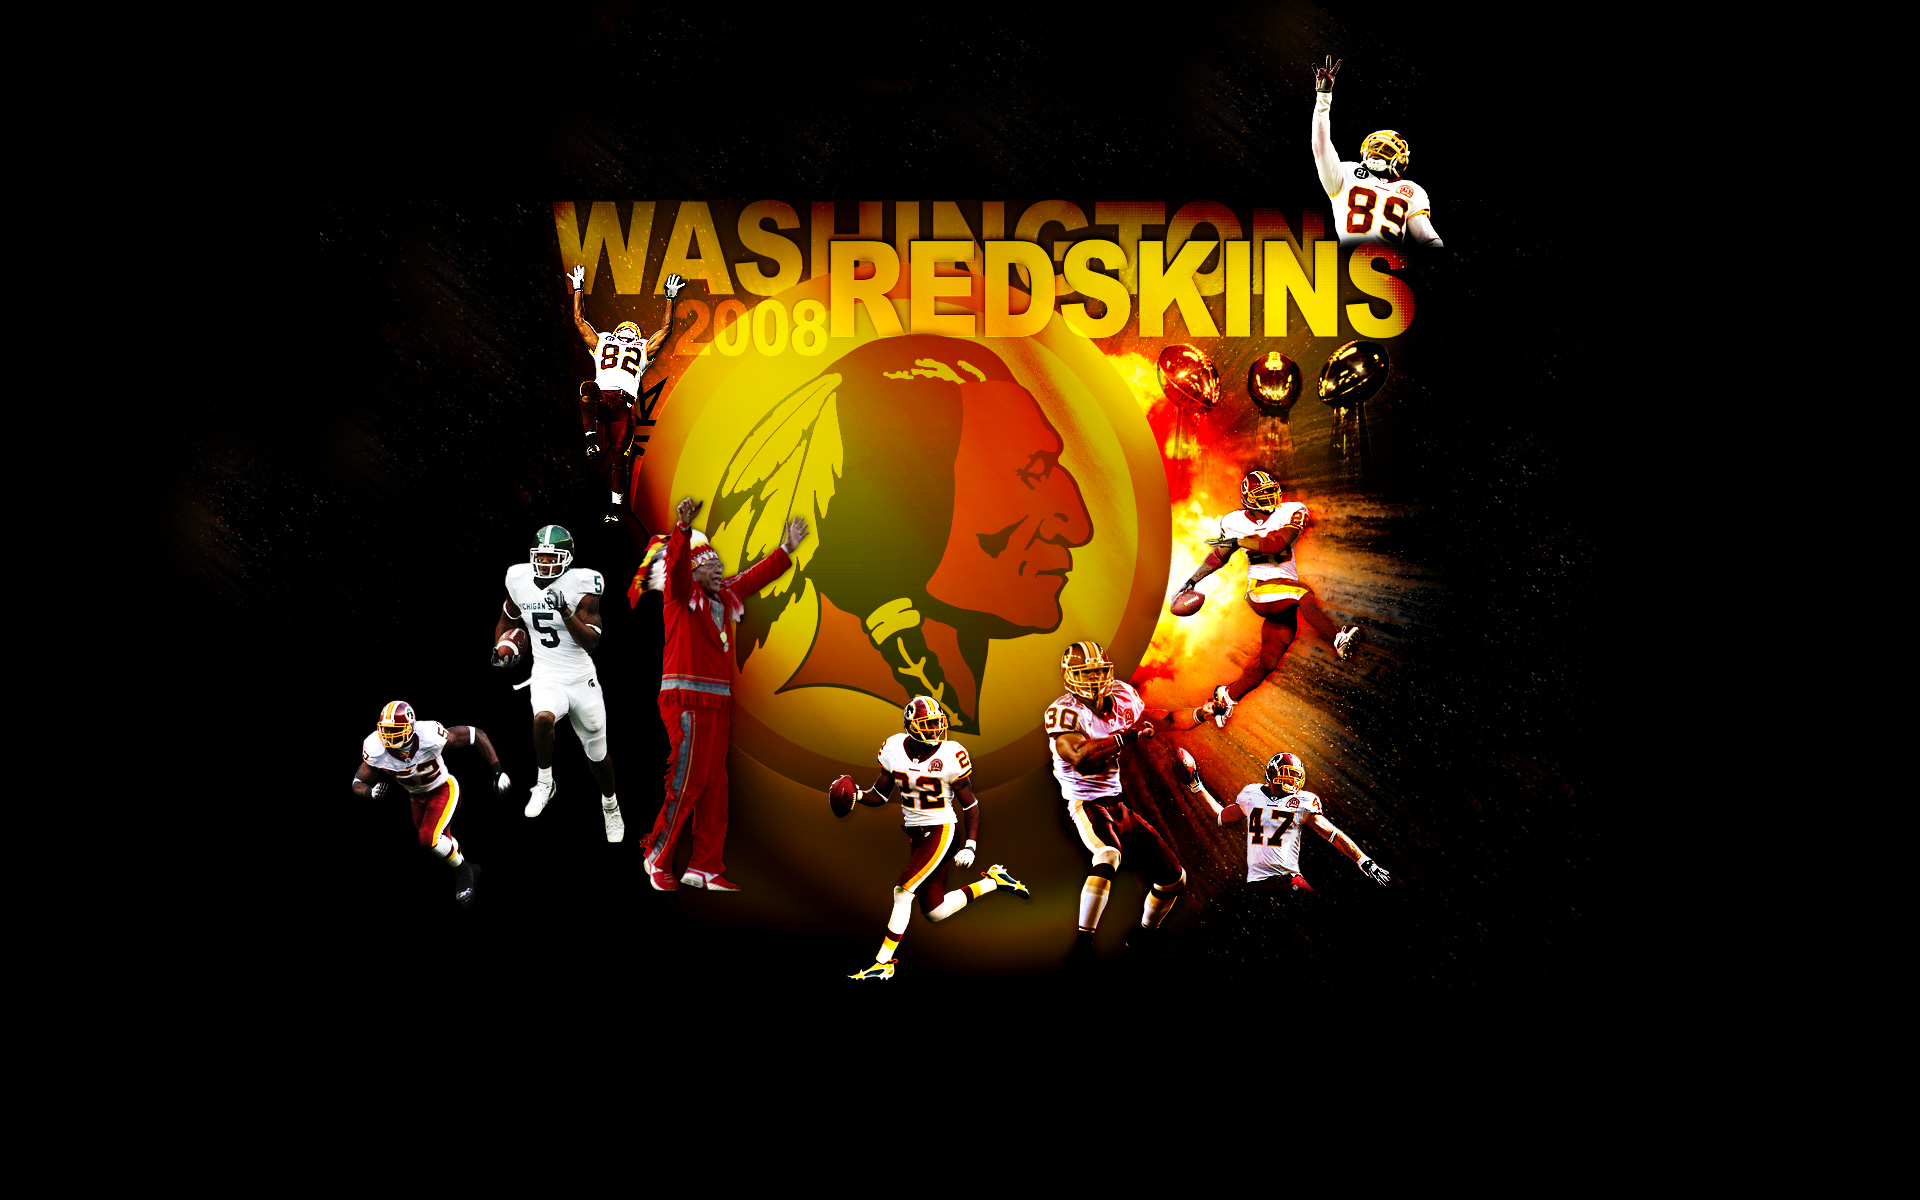 Redskins Wallpapers Chainimage